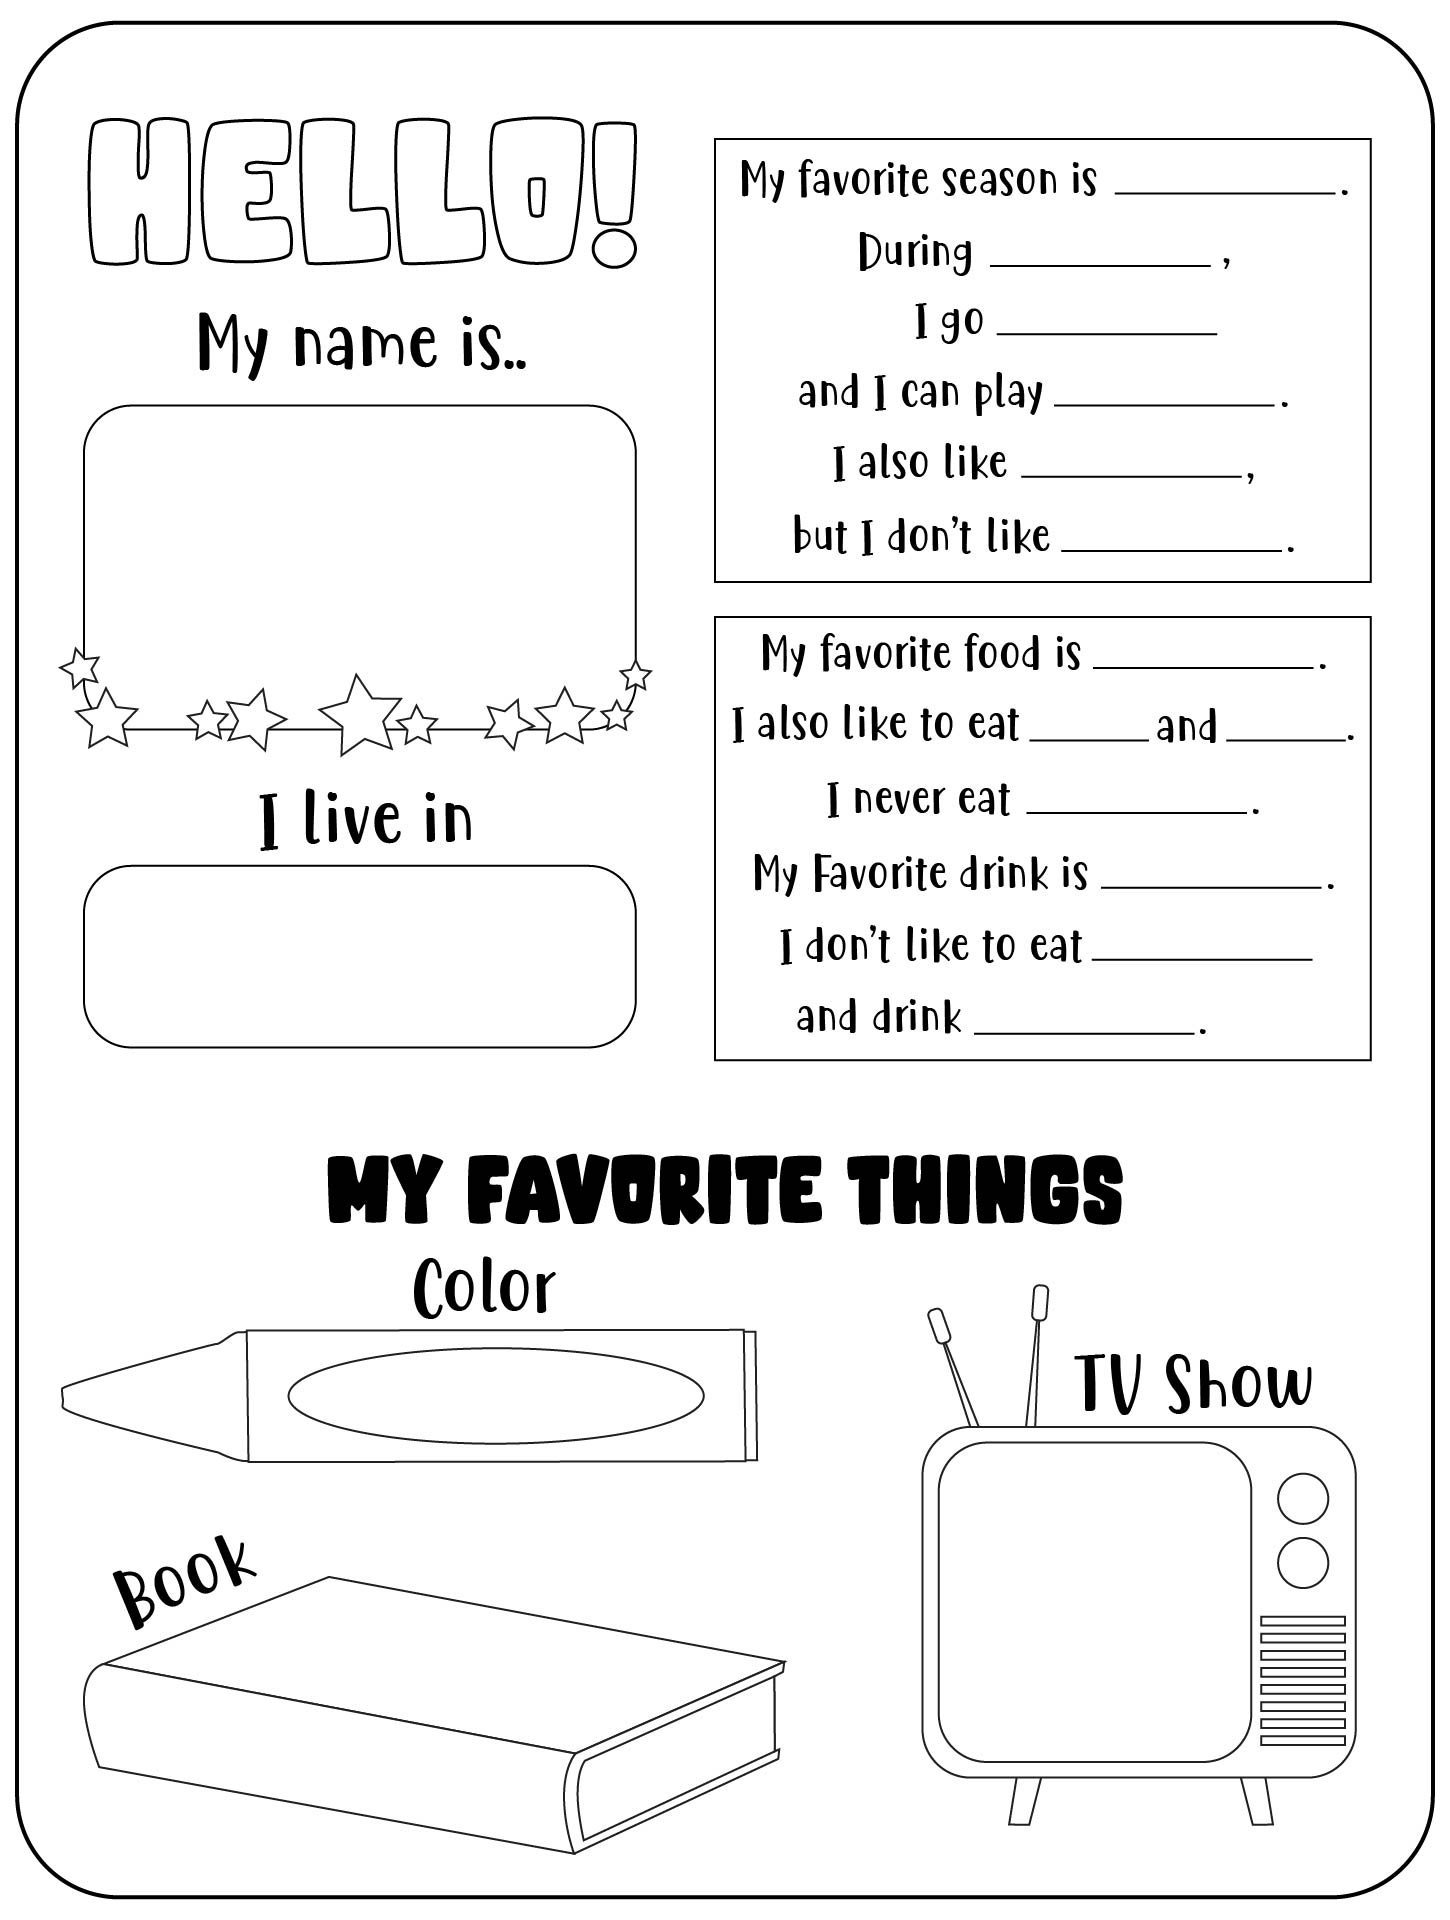 English EFL Worksheet All About Me Printable